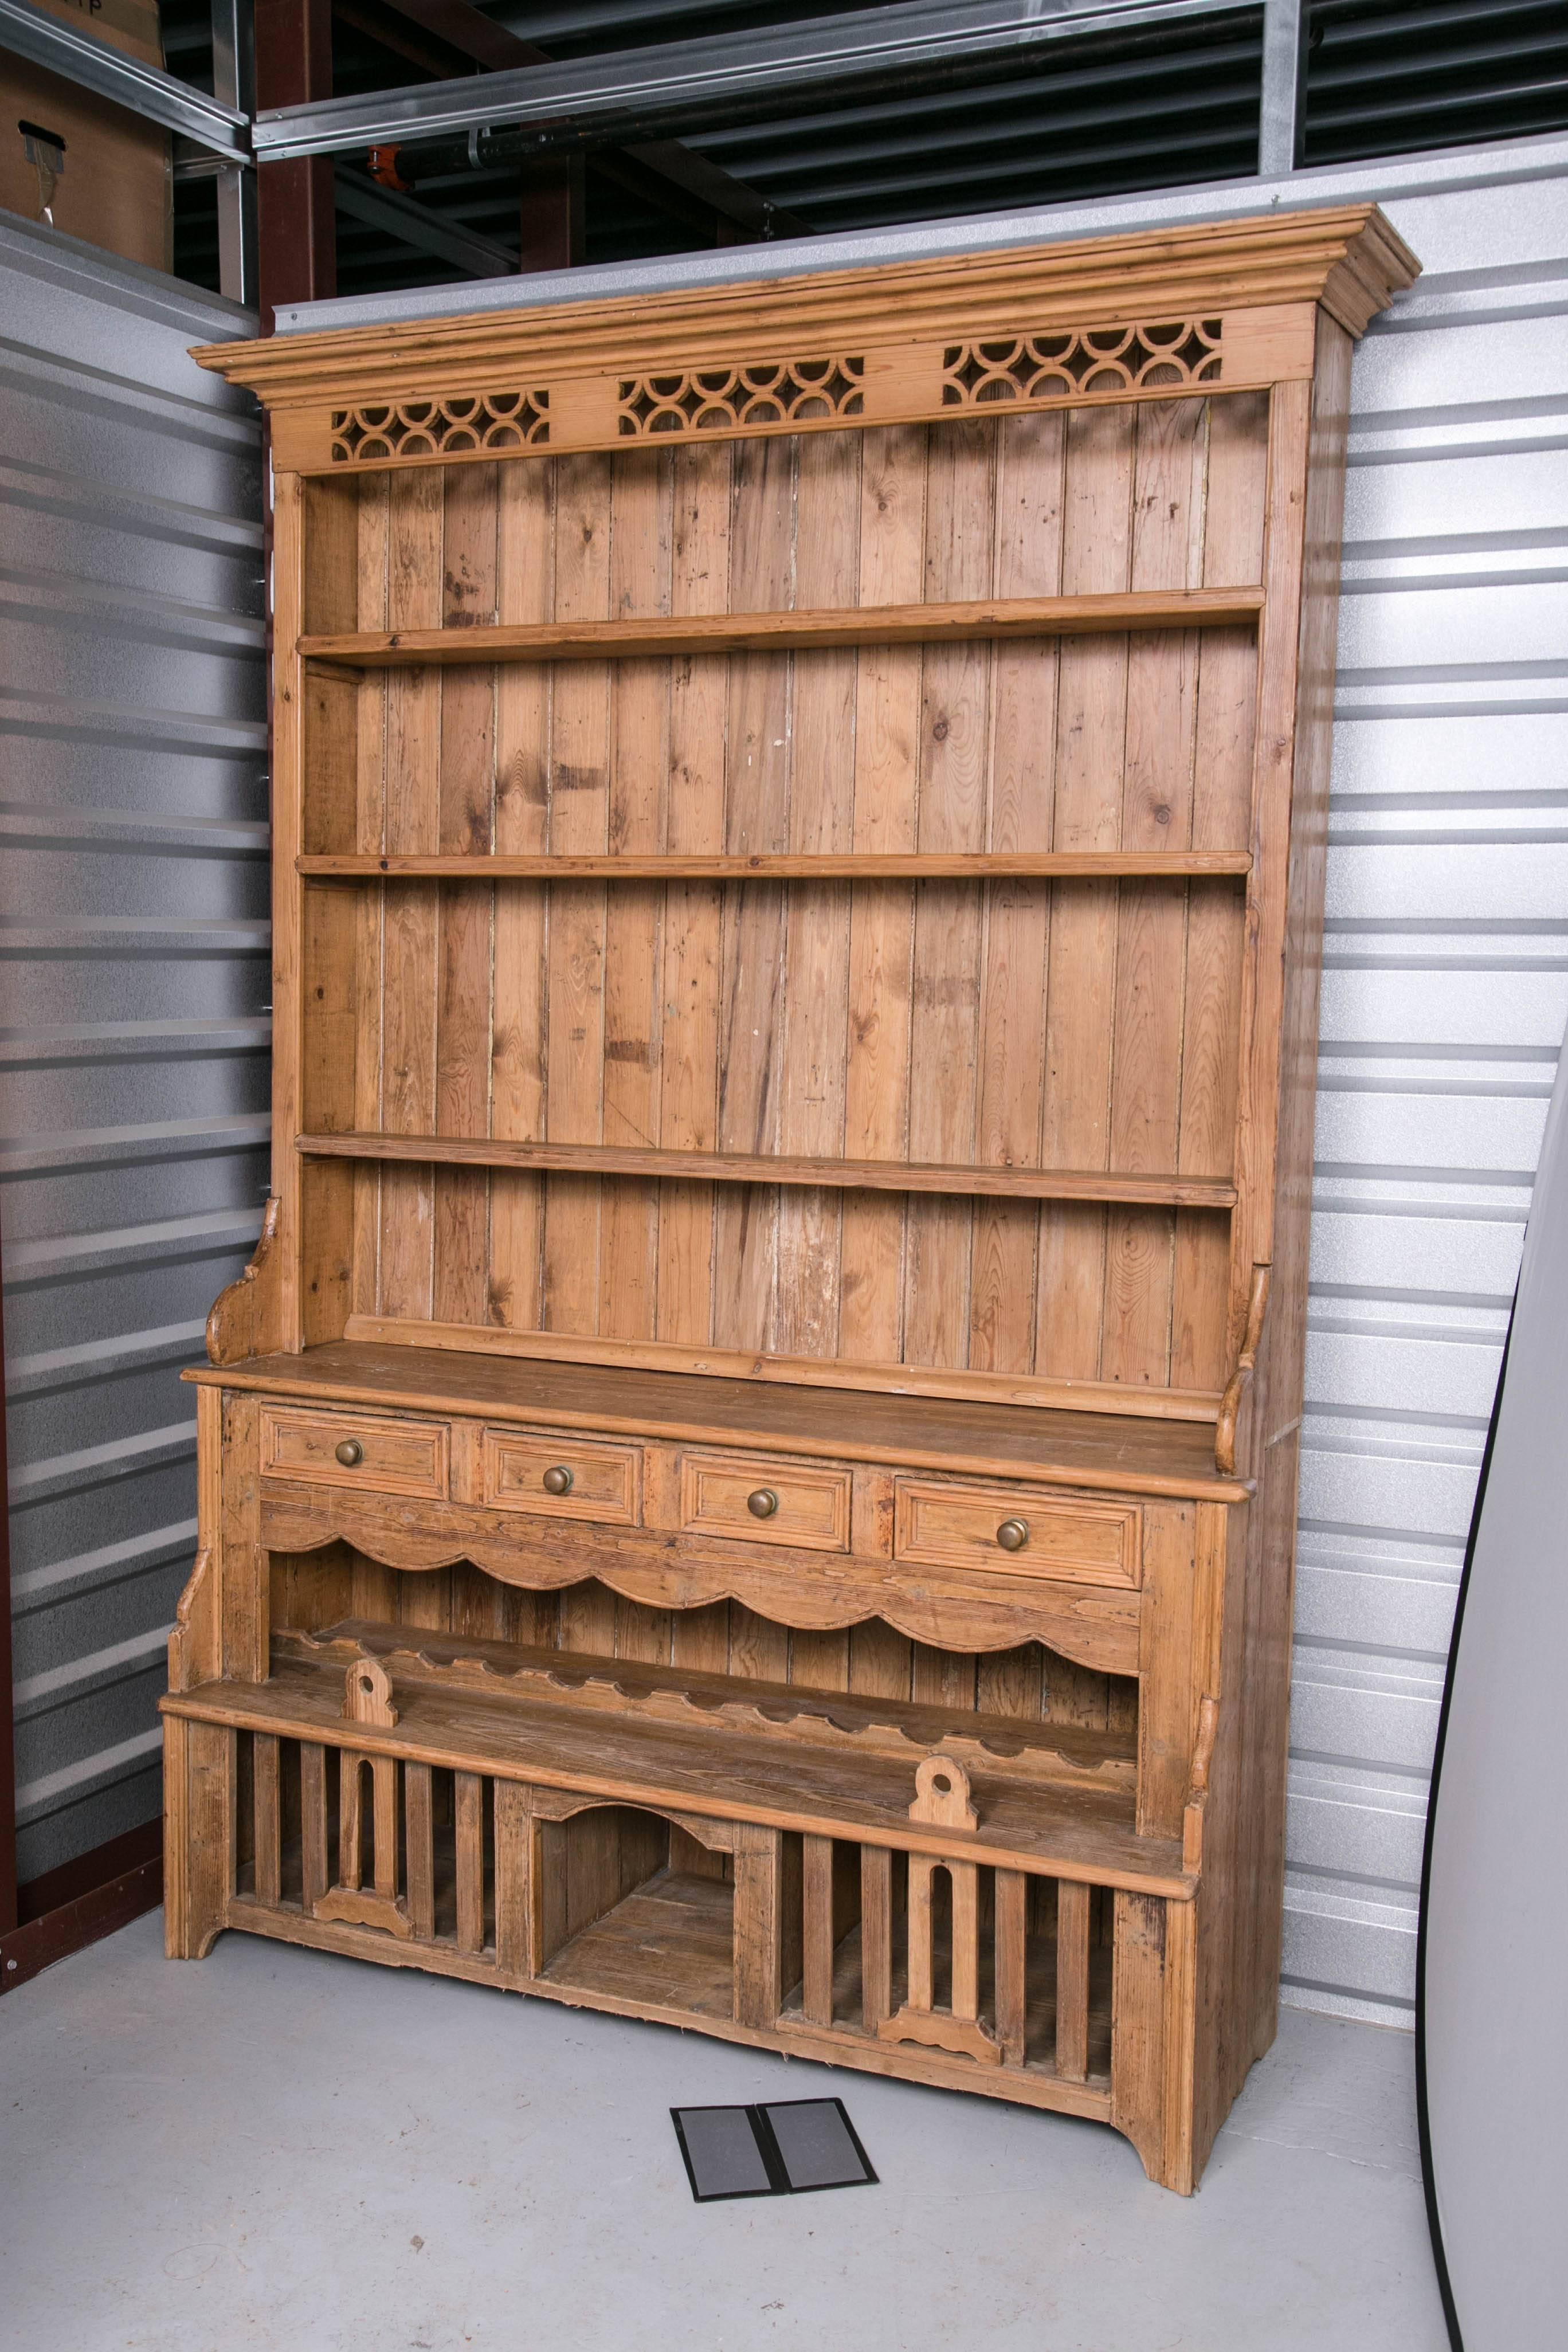 A 19th English solid pine cupboard with elements added over time, two-piece step-back form having four open shelves, over four flush drawers, the open area beneath the drawers fitted with a horizontal wine rack above two chicken coops.